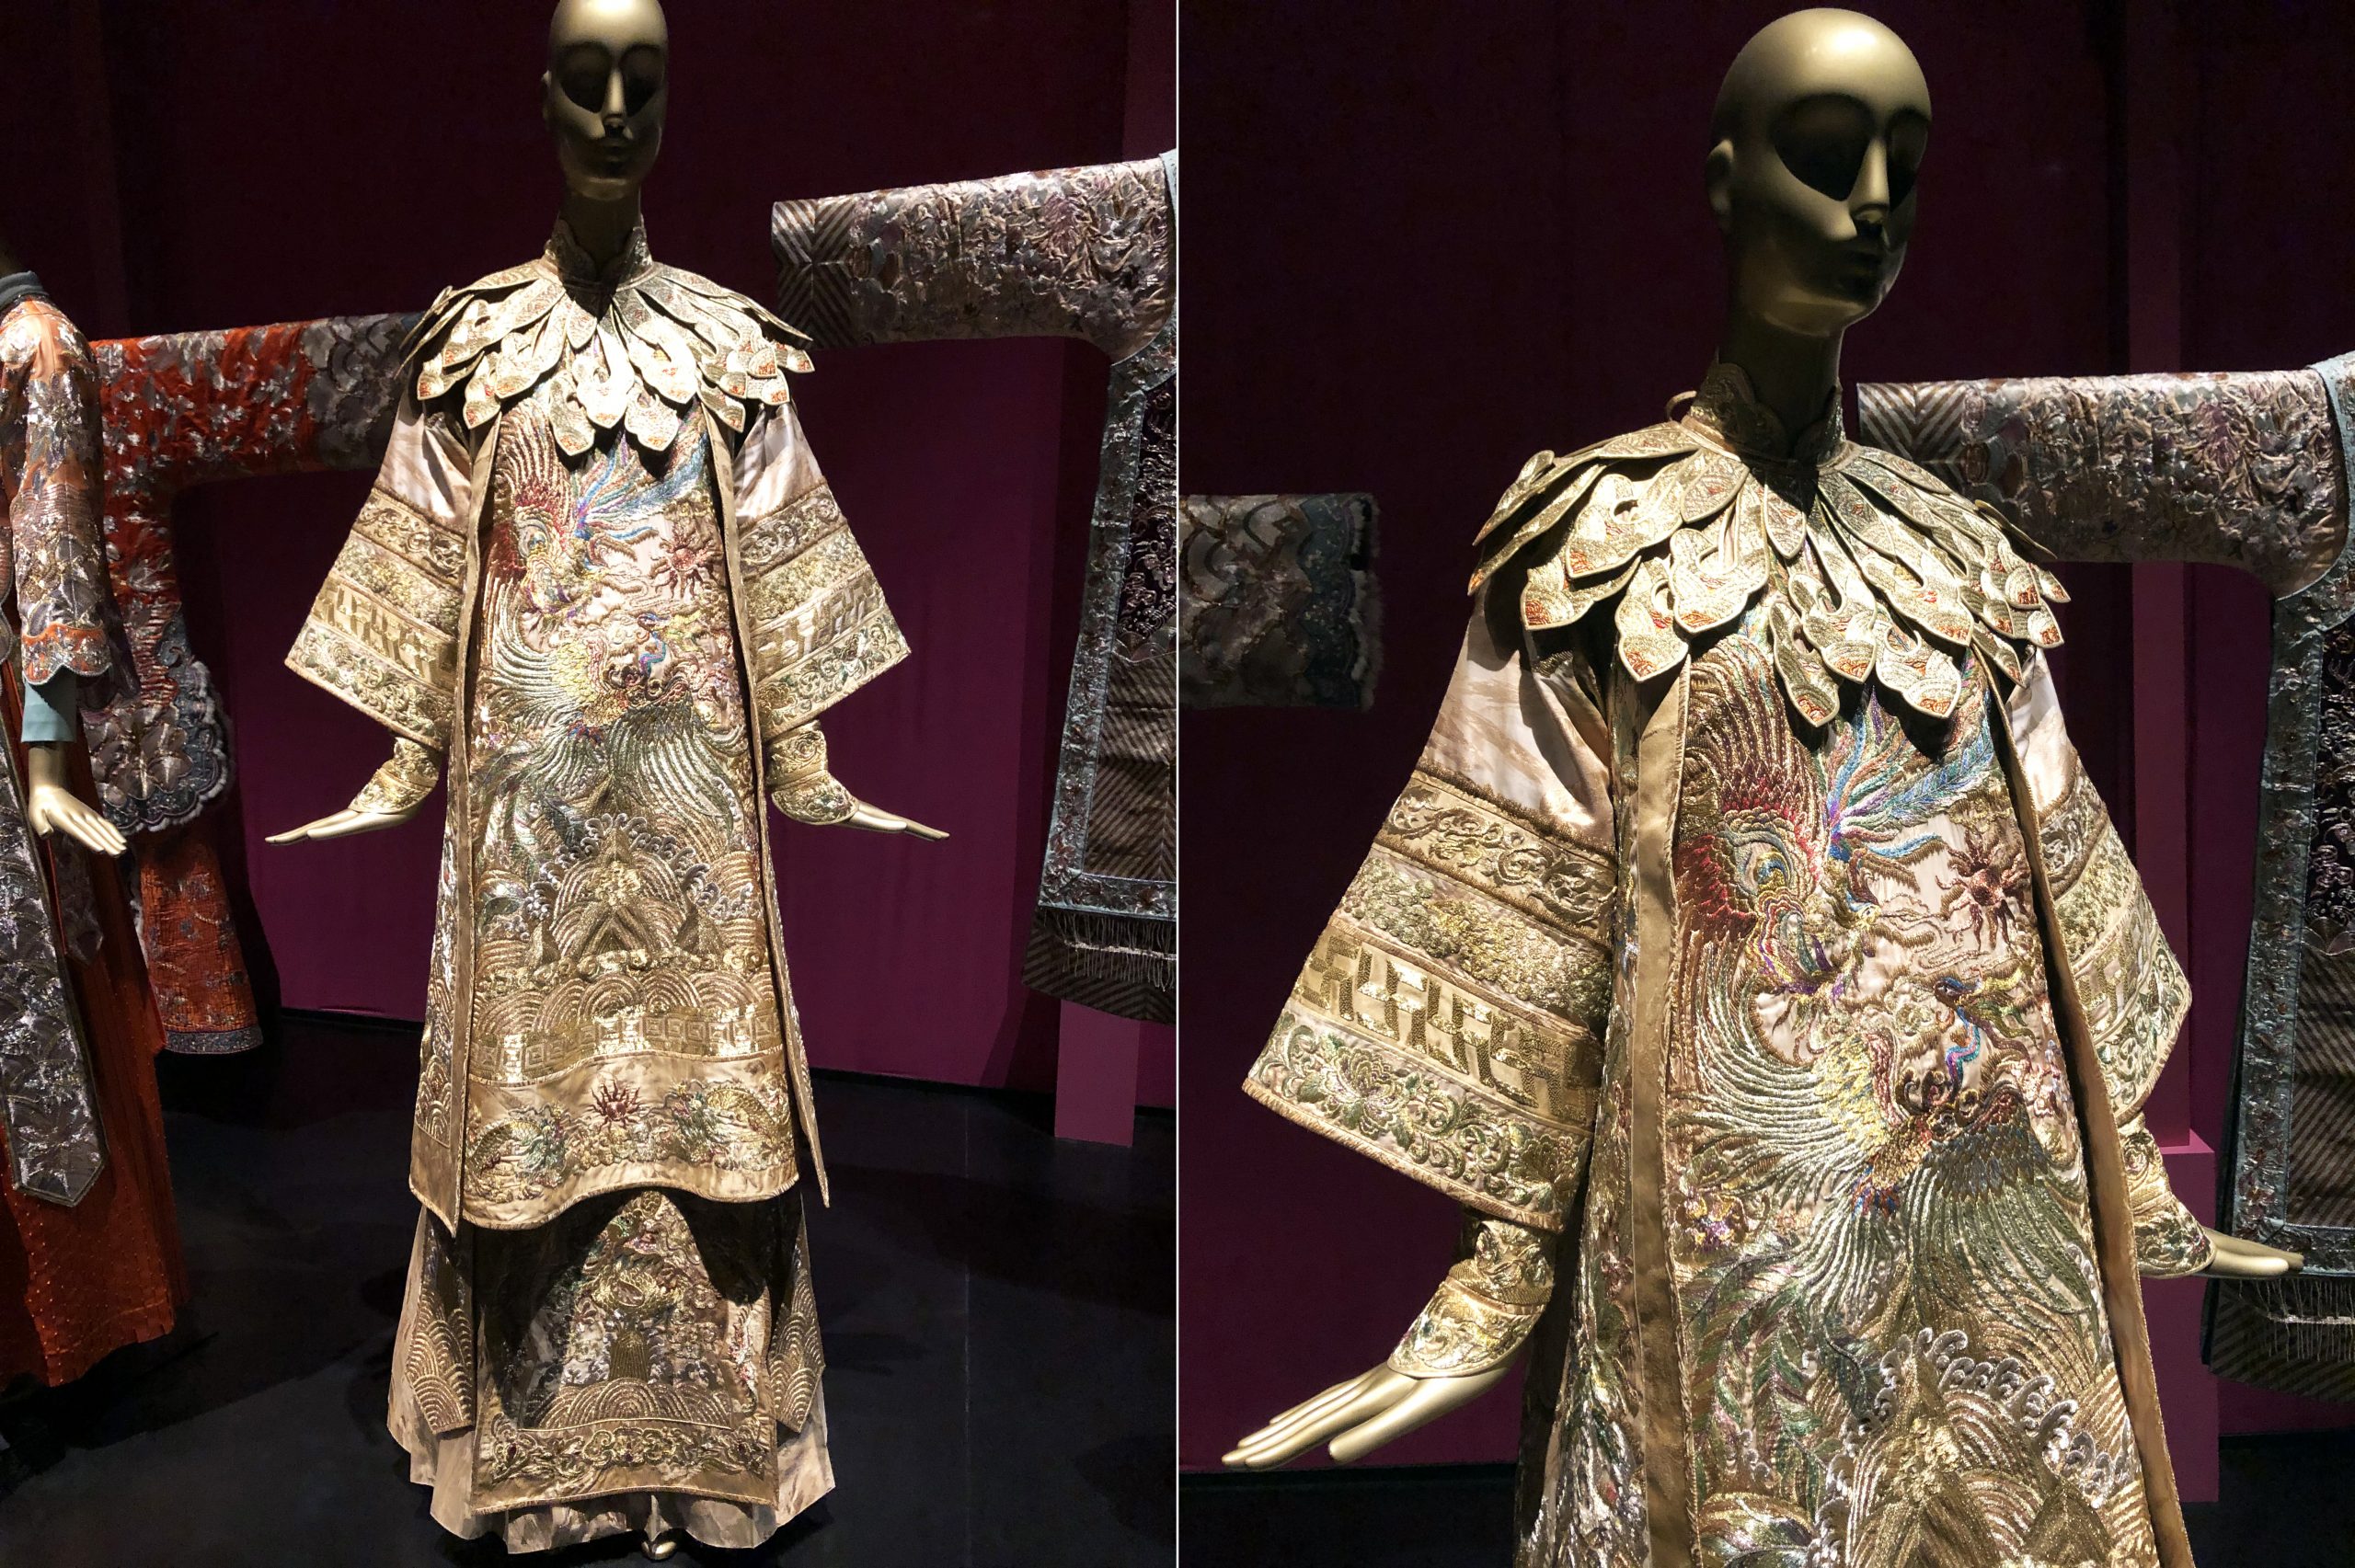 Figures 3 and 4: ‘Guo Pei: Chinese Art and Couture’: examples of the linkages between traditional Chinese dress, Peranakan wedding costume, and contemporary Chinese couture design. Photos by Clair Hurford

